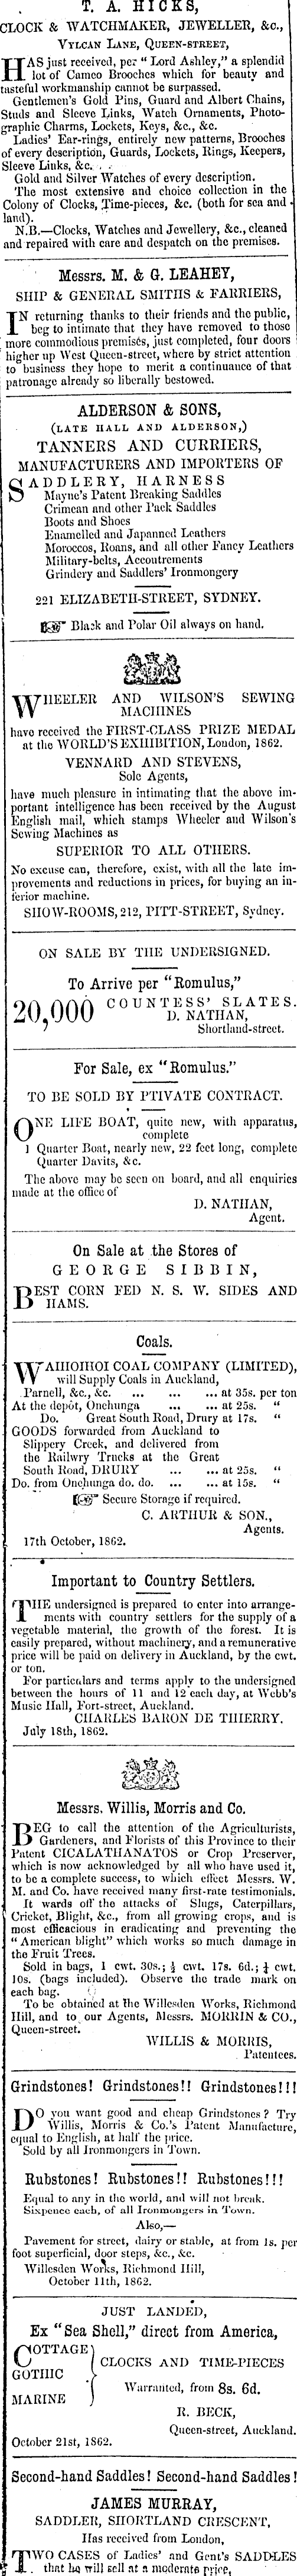 Papers Past Newspapers New Zealander 26 November 1862 Page 8 Advertisements Column 2